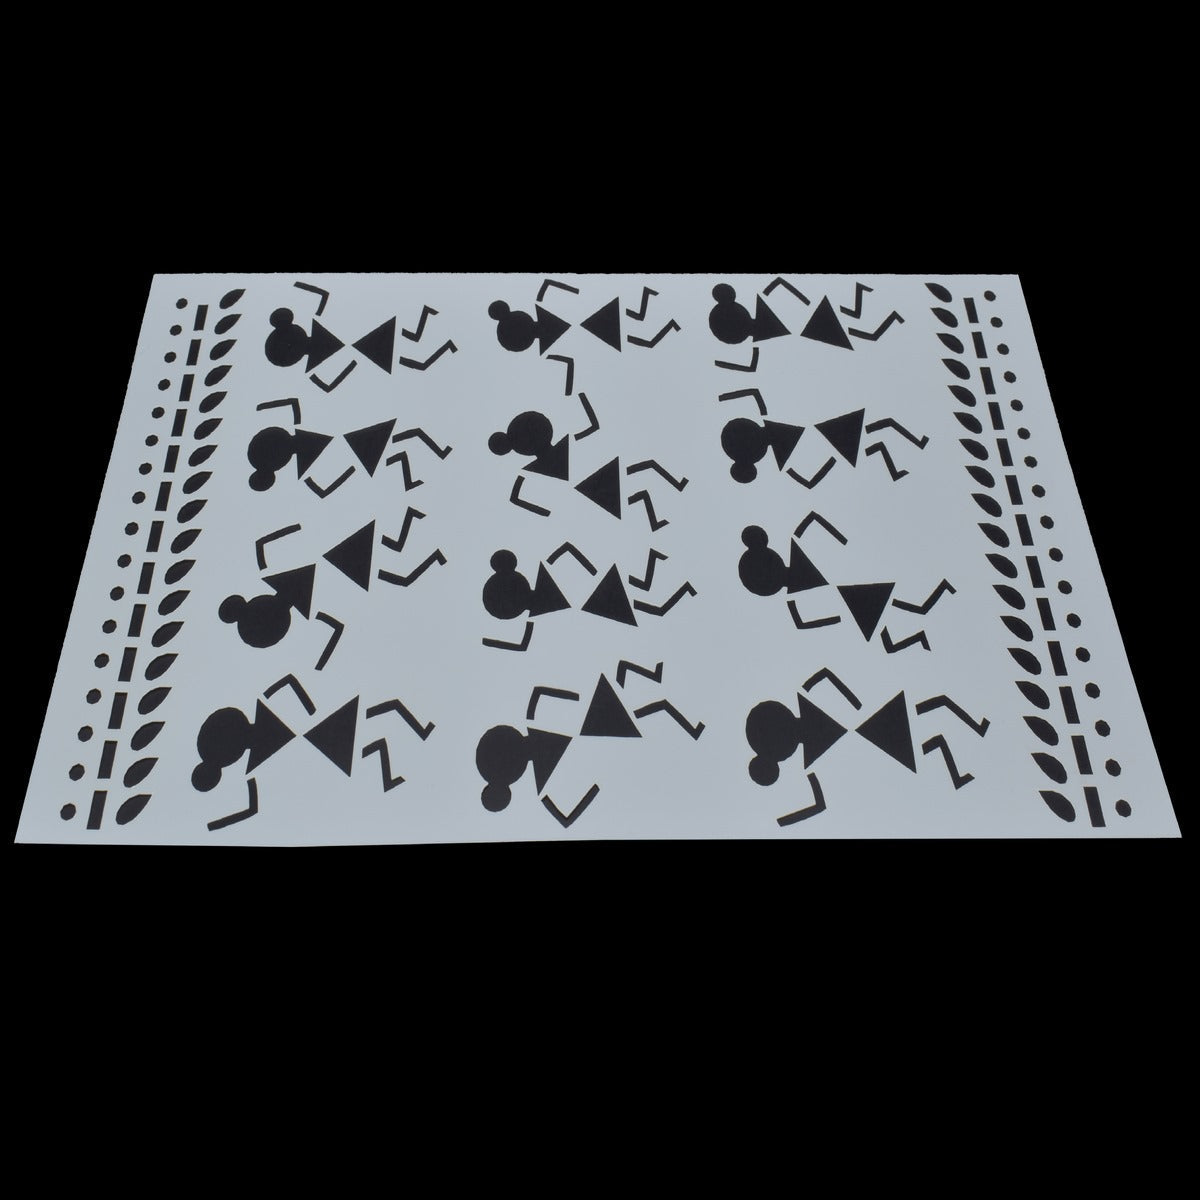 jags-mumbai Jewellery Cultural Heritage: Stencil Plastic A4 size African Tribes for Inspired Artistry